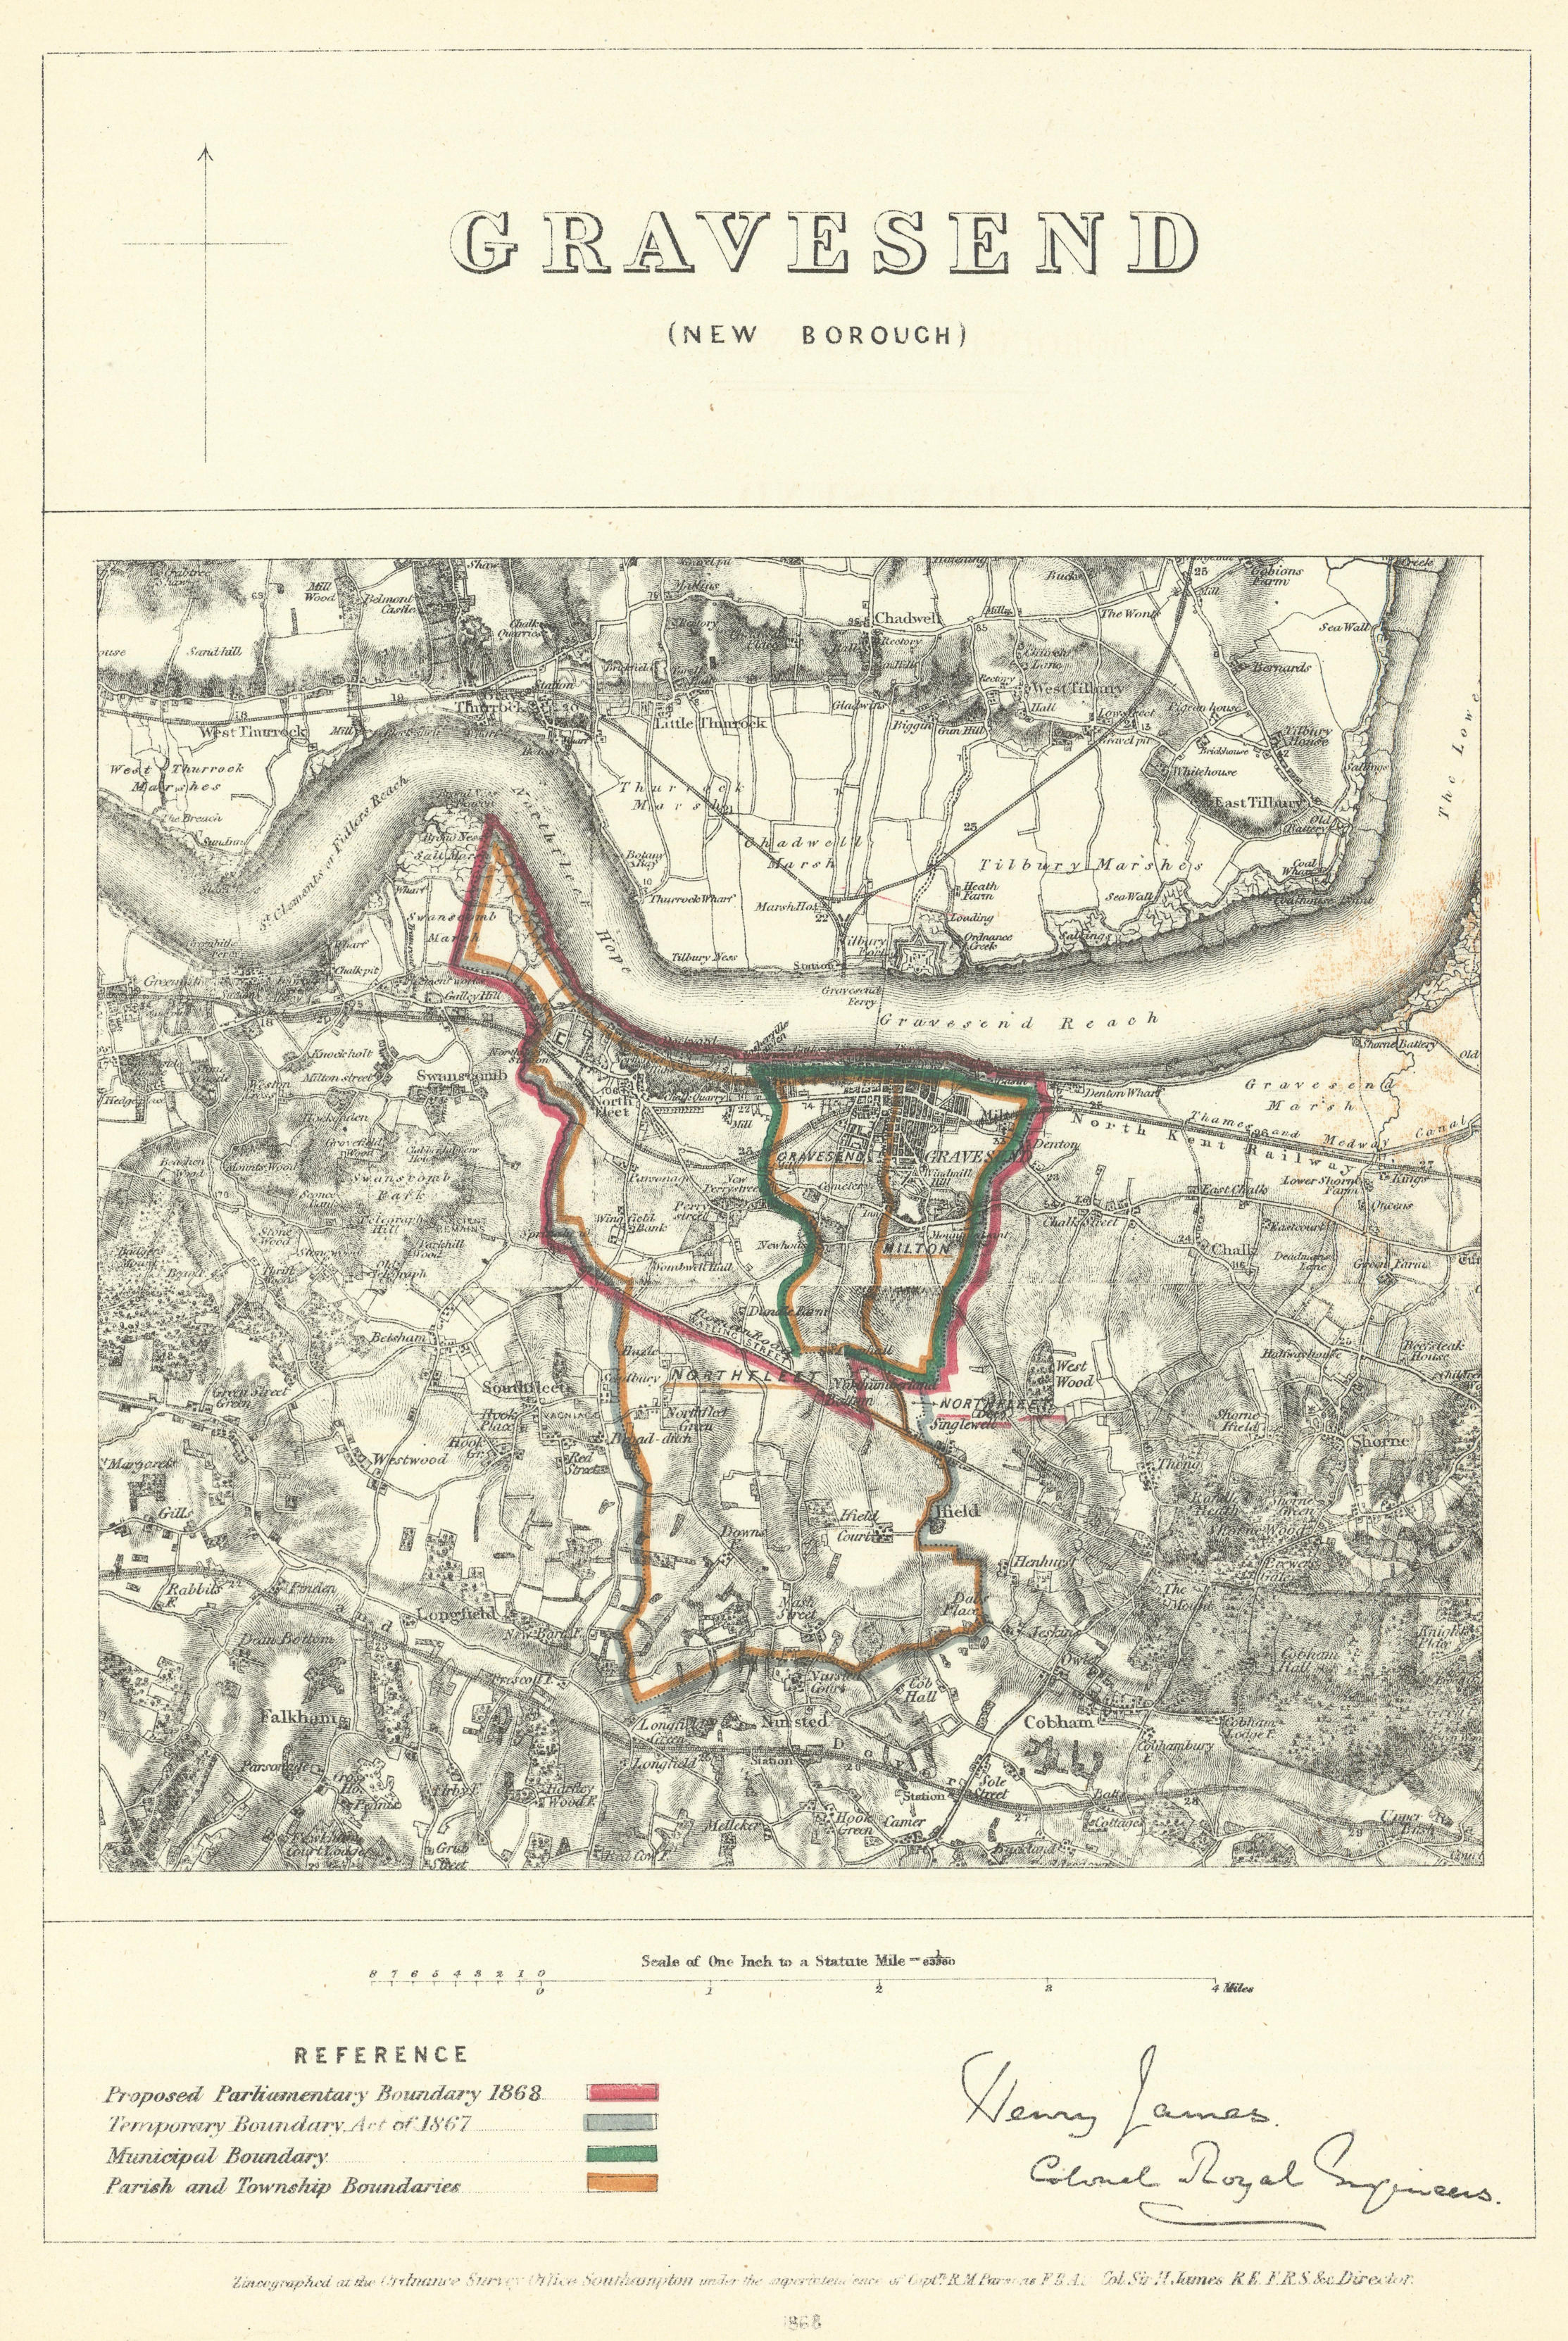 Associate Product Gravesend (New Borough), Kent. JAMES. Parliamentary Boundary Commission 1868 map